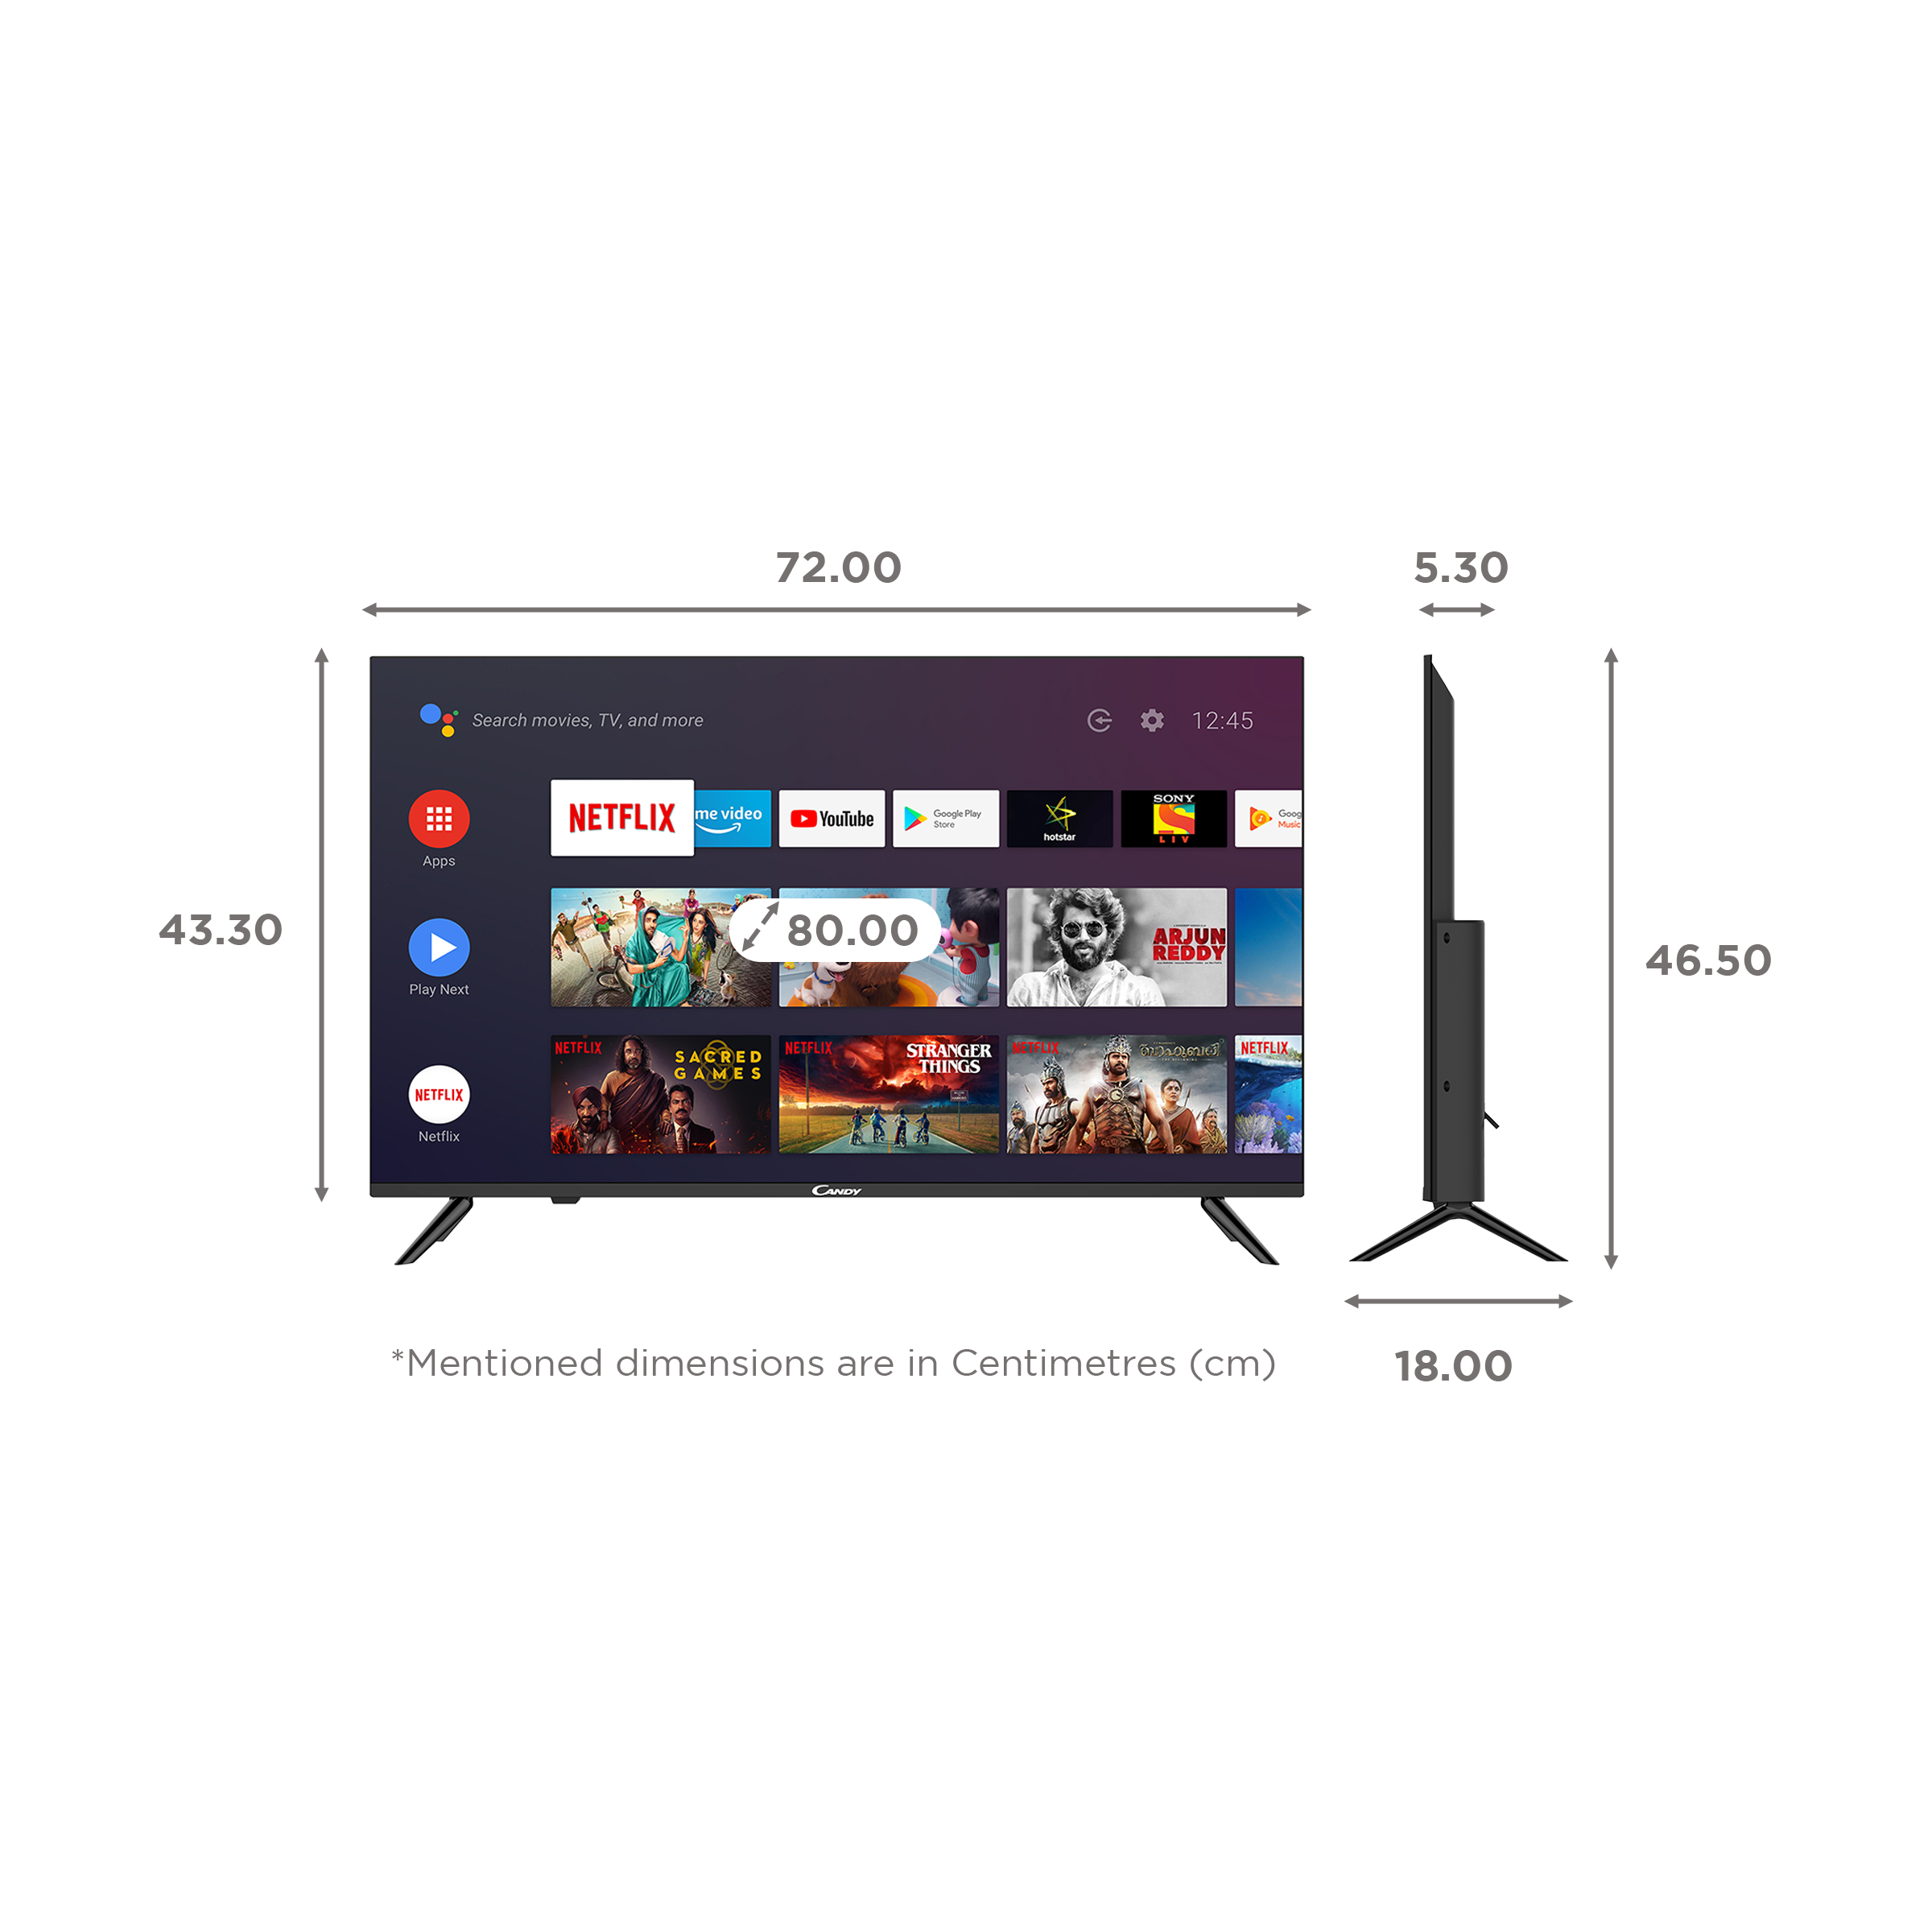 Candy KA66 80 cm (32 inch) HD Ready LED Smart Android TV with Google Assistant (2021 model)_2